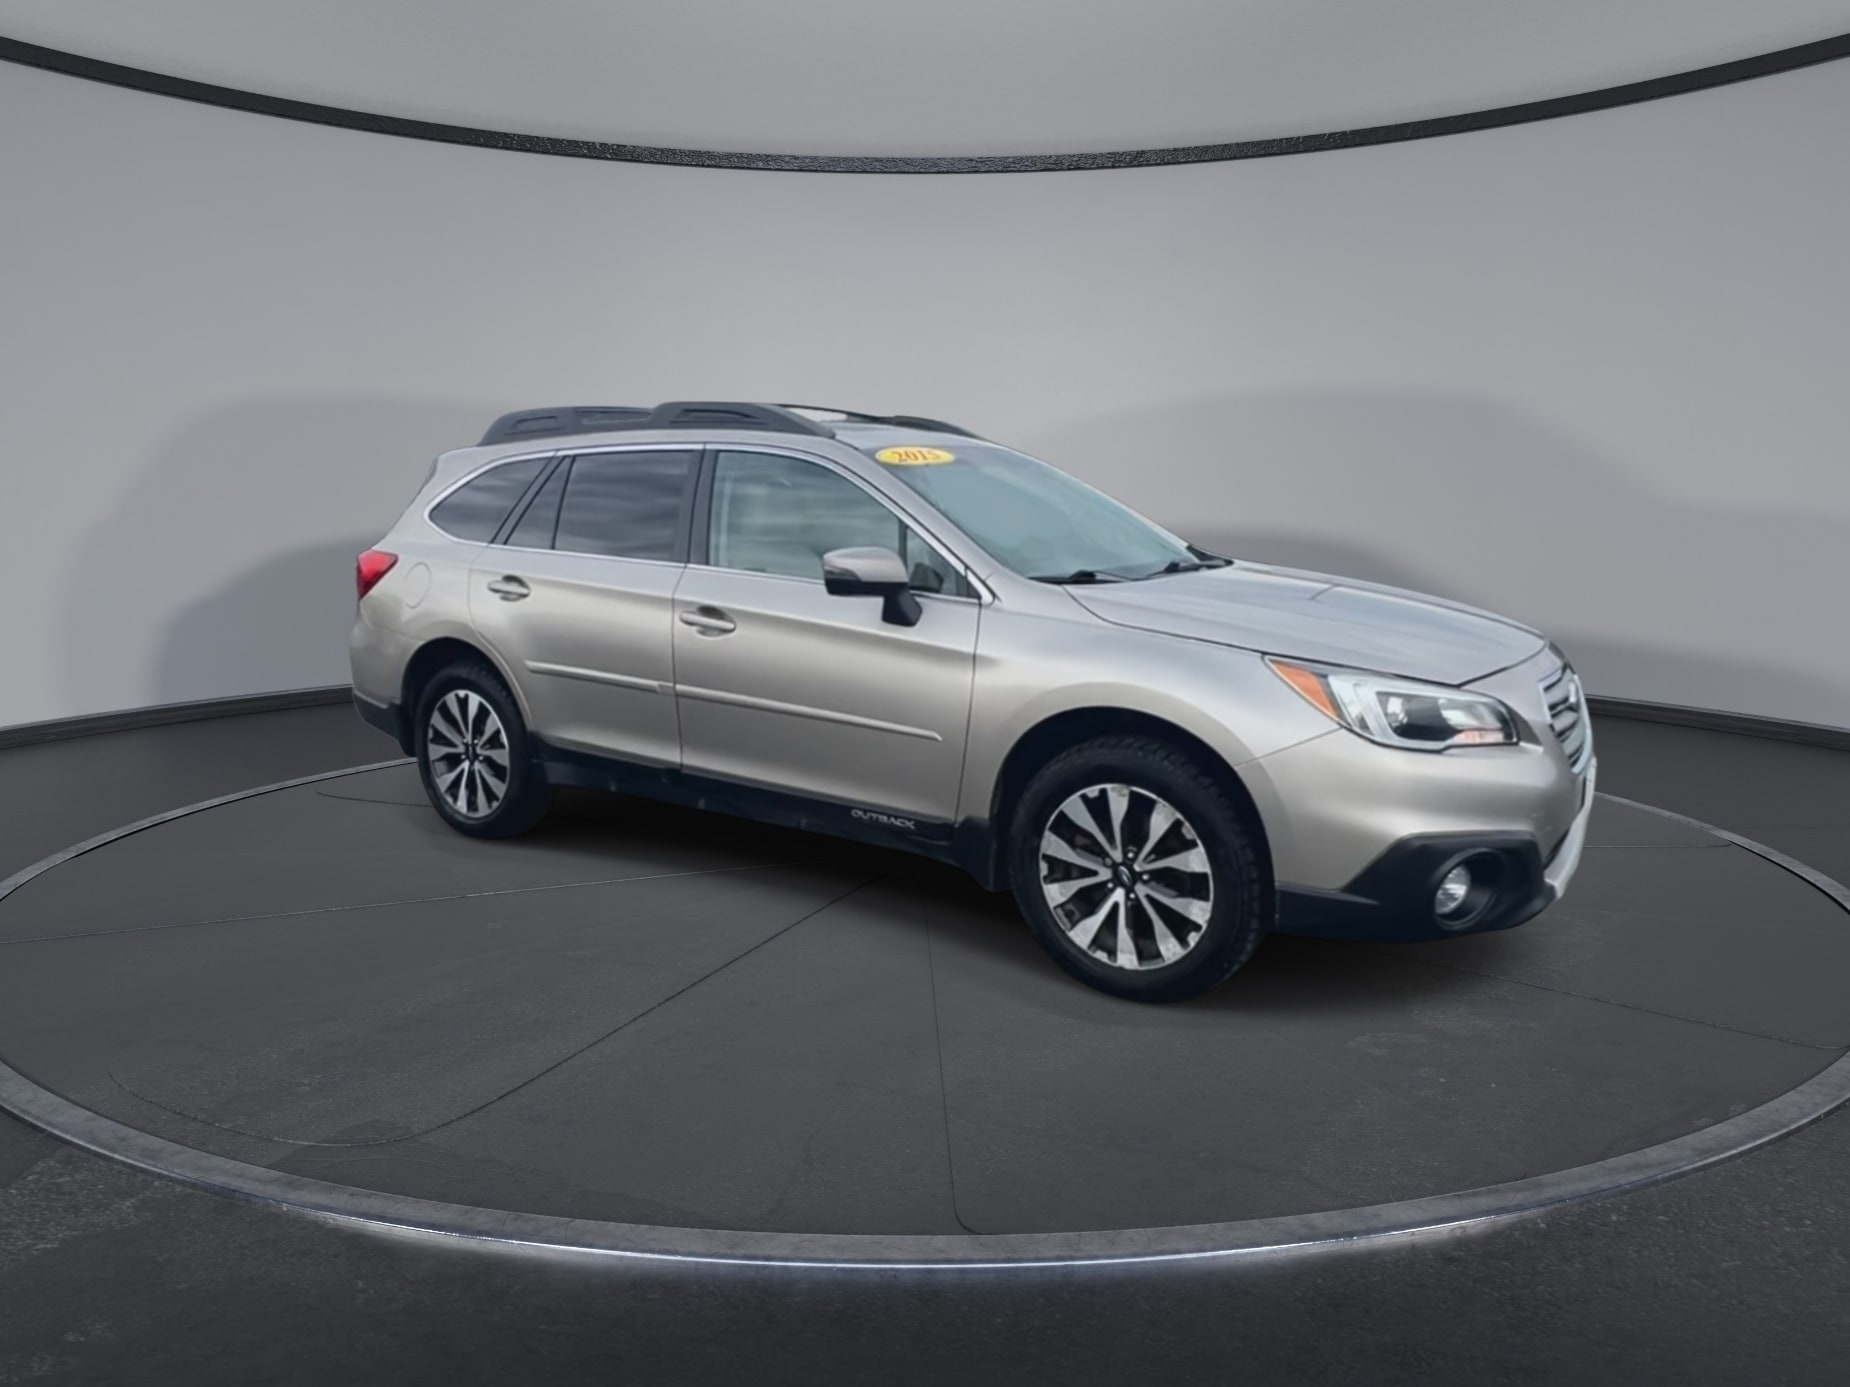 Used 2015 Subaru Outback Limited with VIN 4S4BSALC5F3352640 for sale in Montpelier, VT